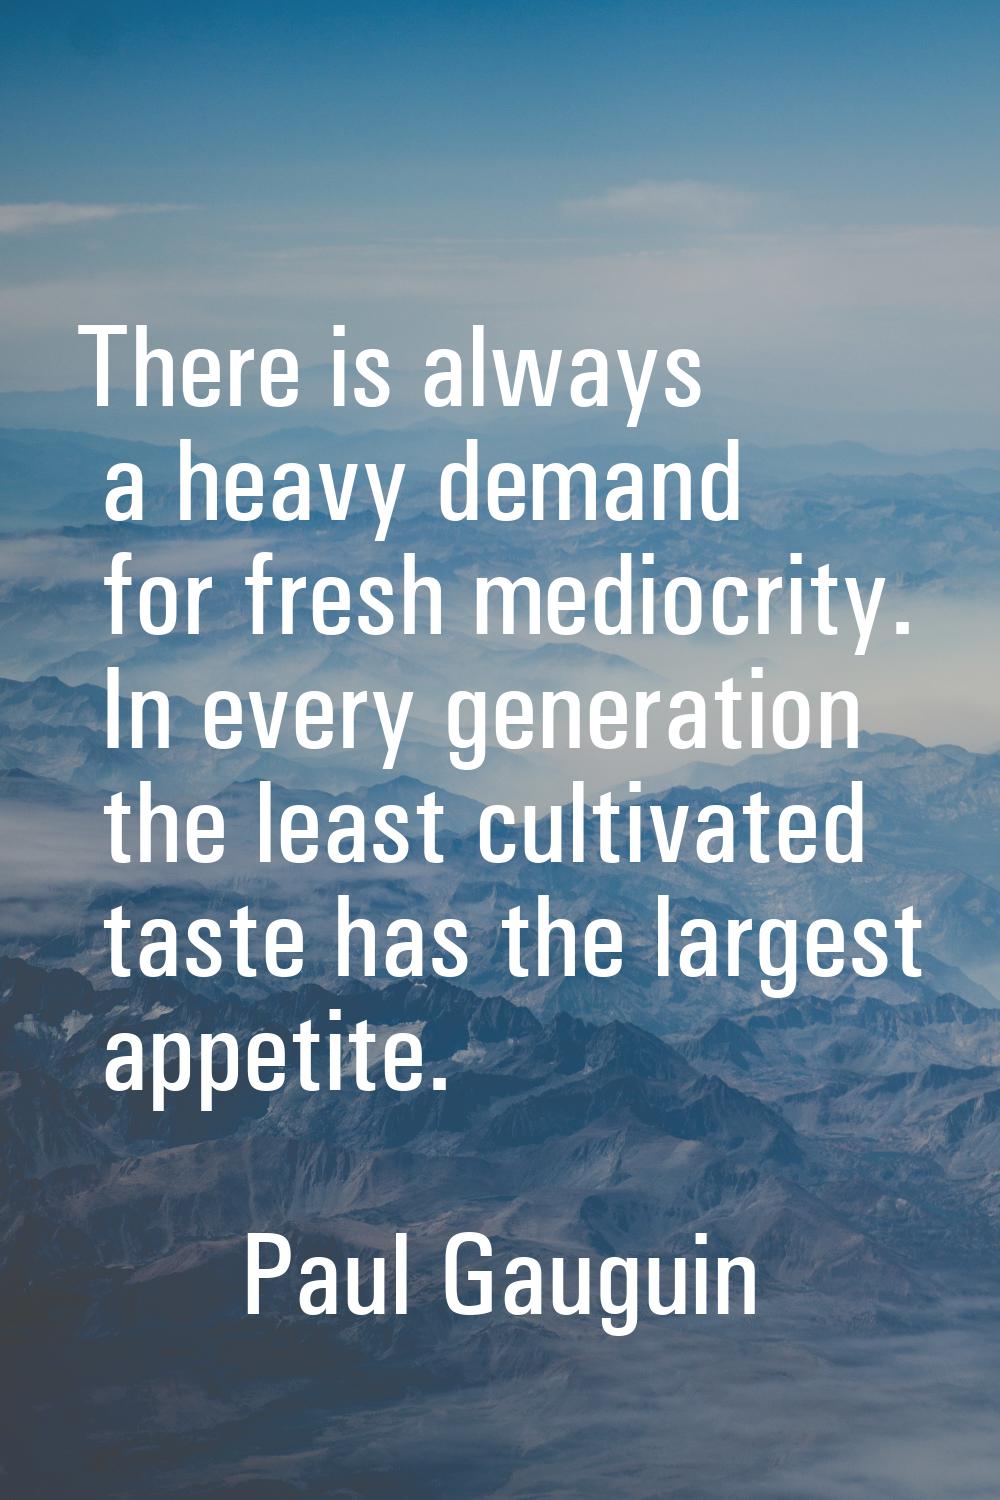 There is always a heavy demand for fresh mediocrity. In every generation the least cultivated taste